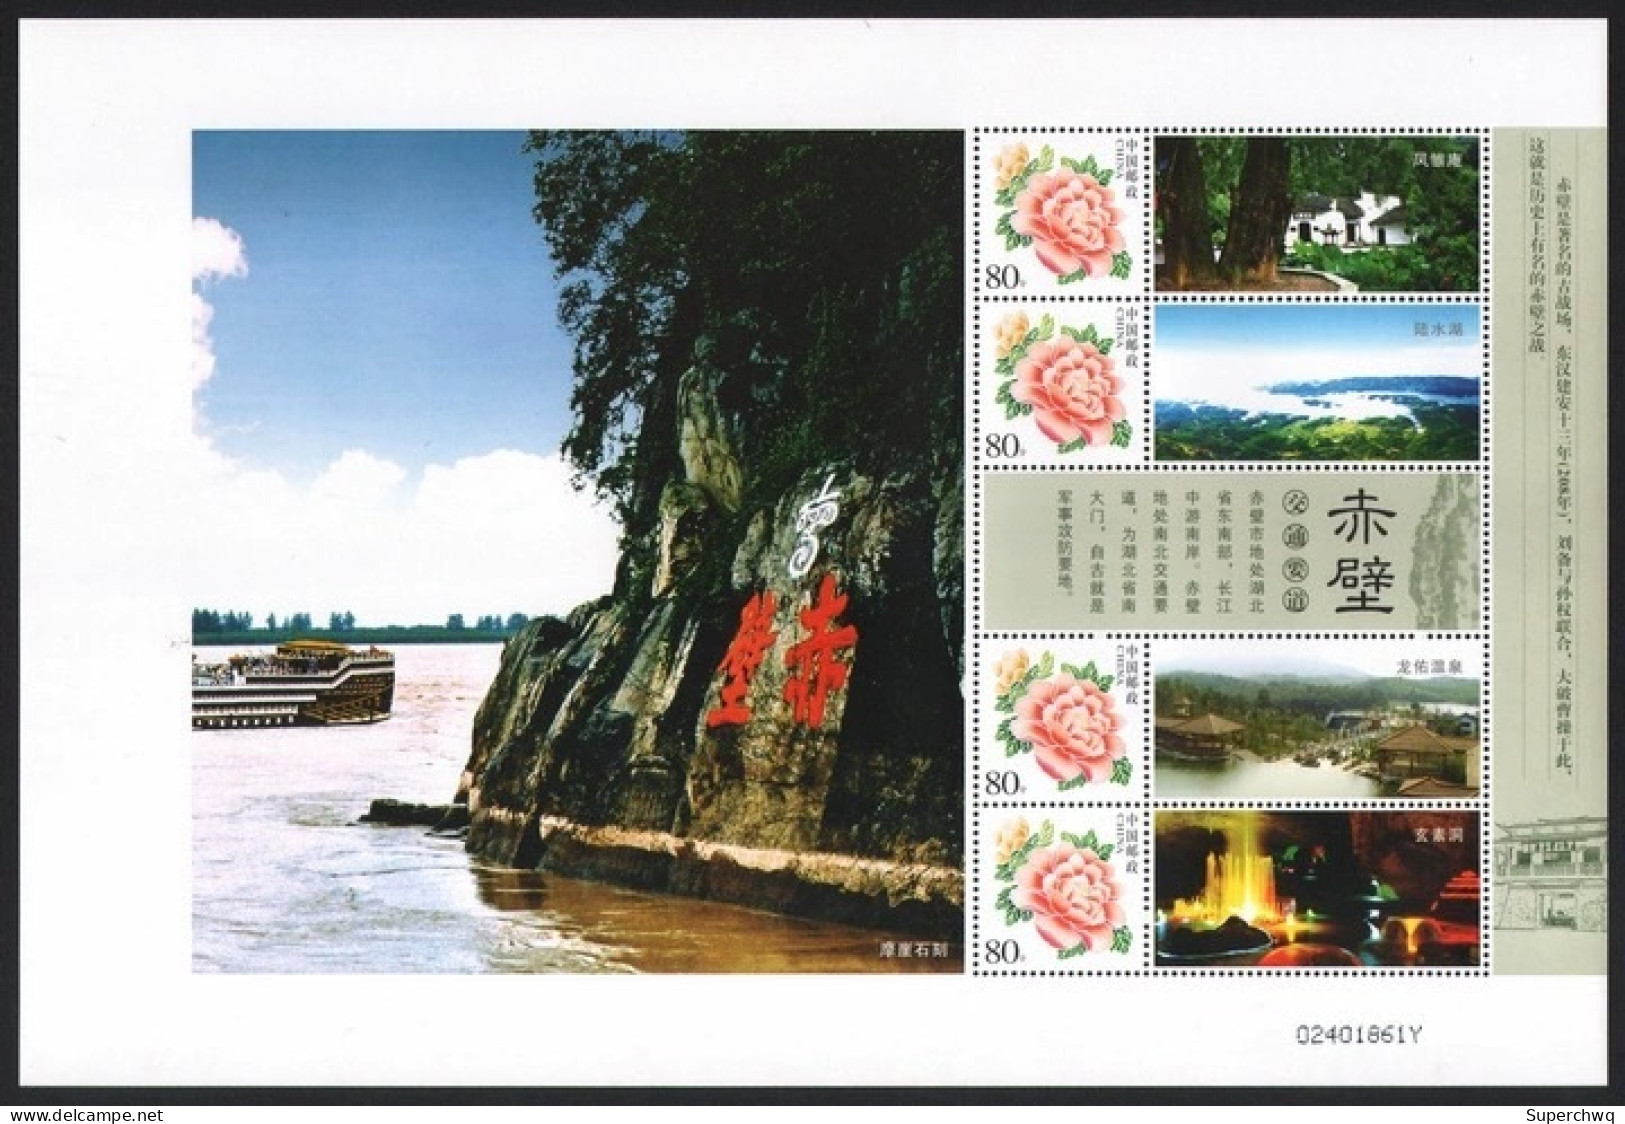 China Personalized Stamp  MS MNH,The Three Kingdoms Red Cliff Ancient Battlefield - Unused Stamps